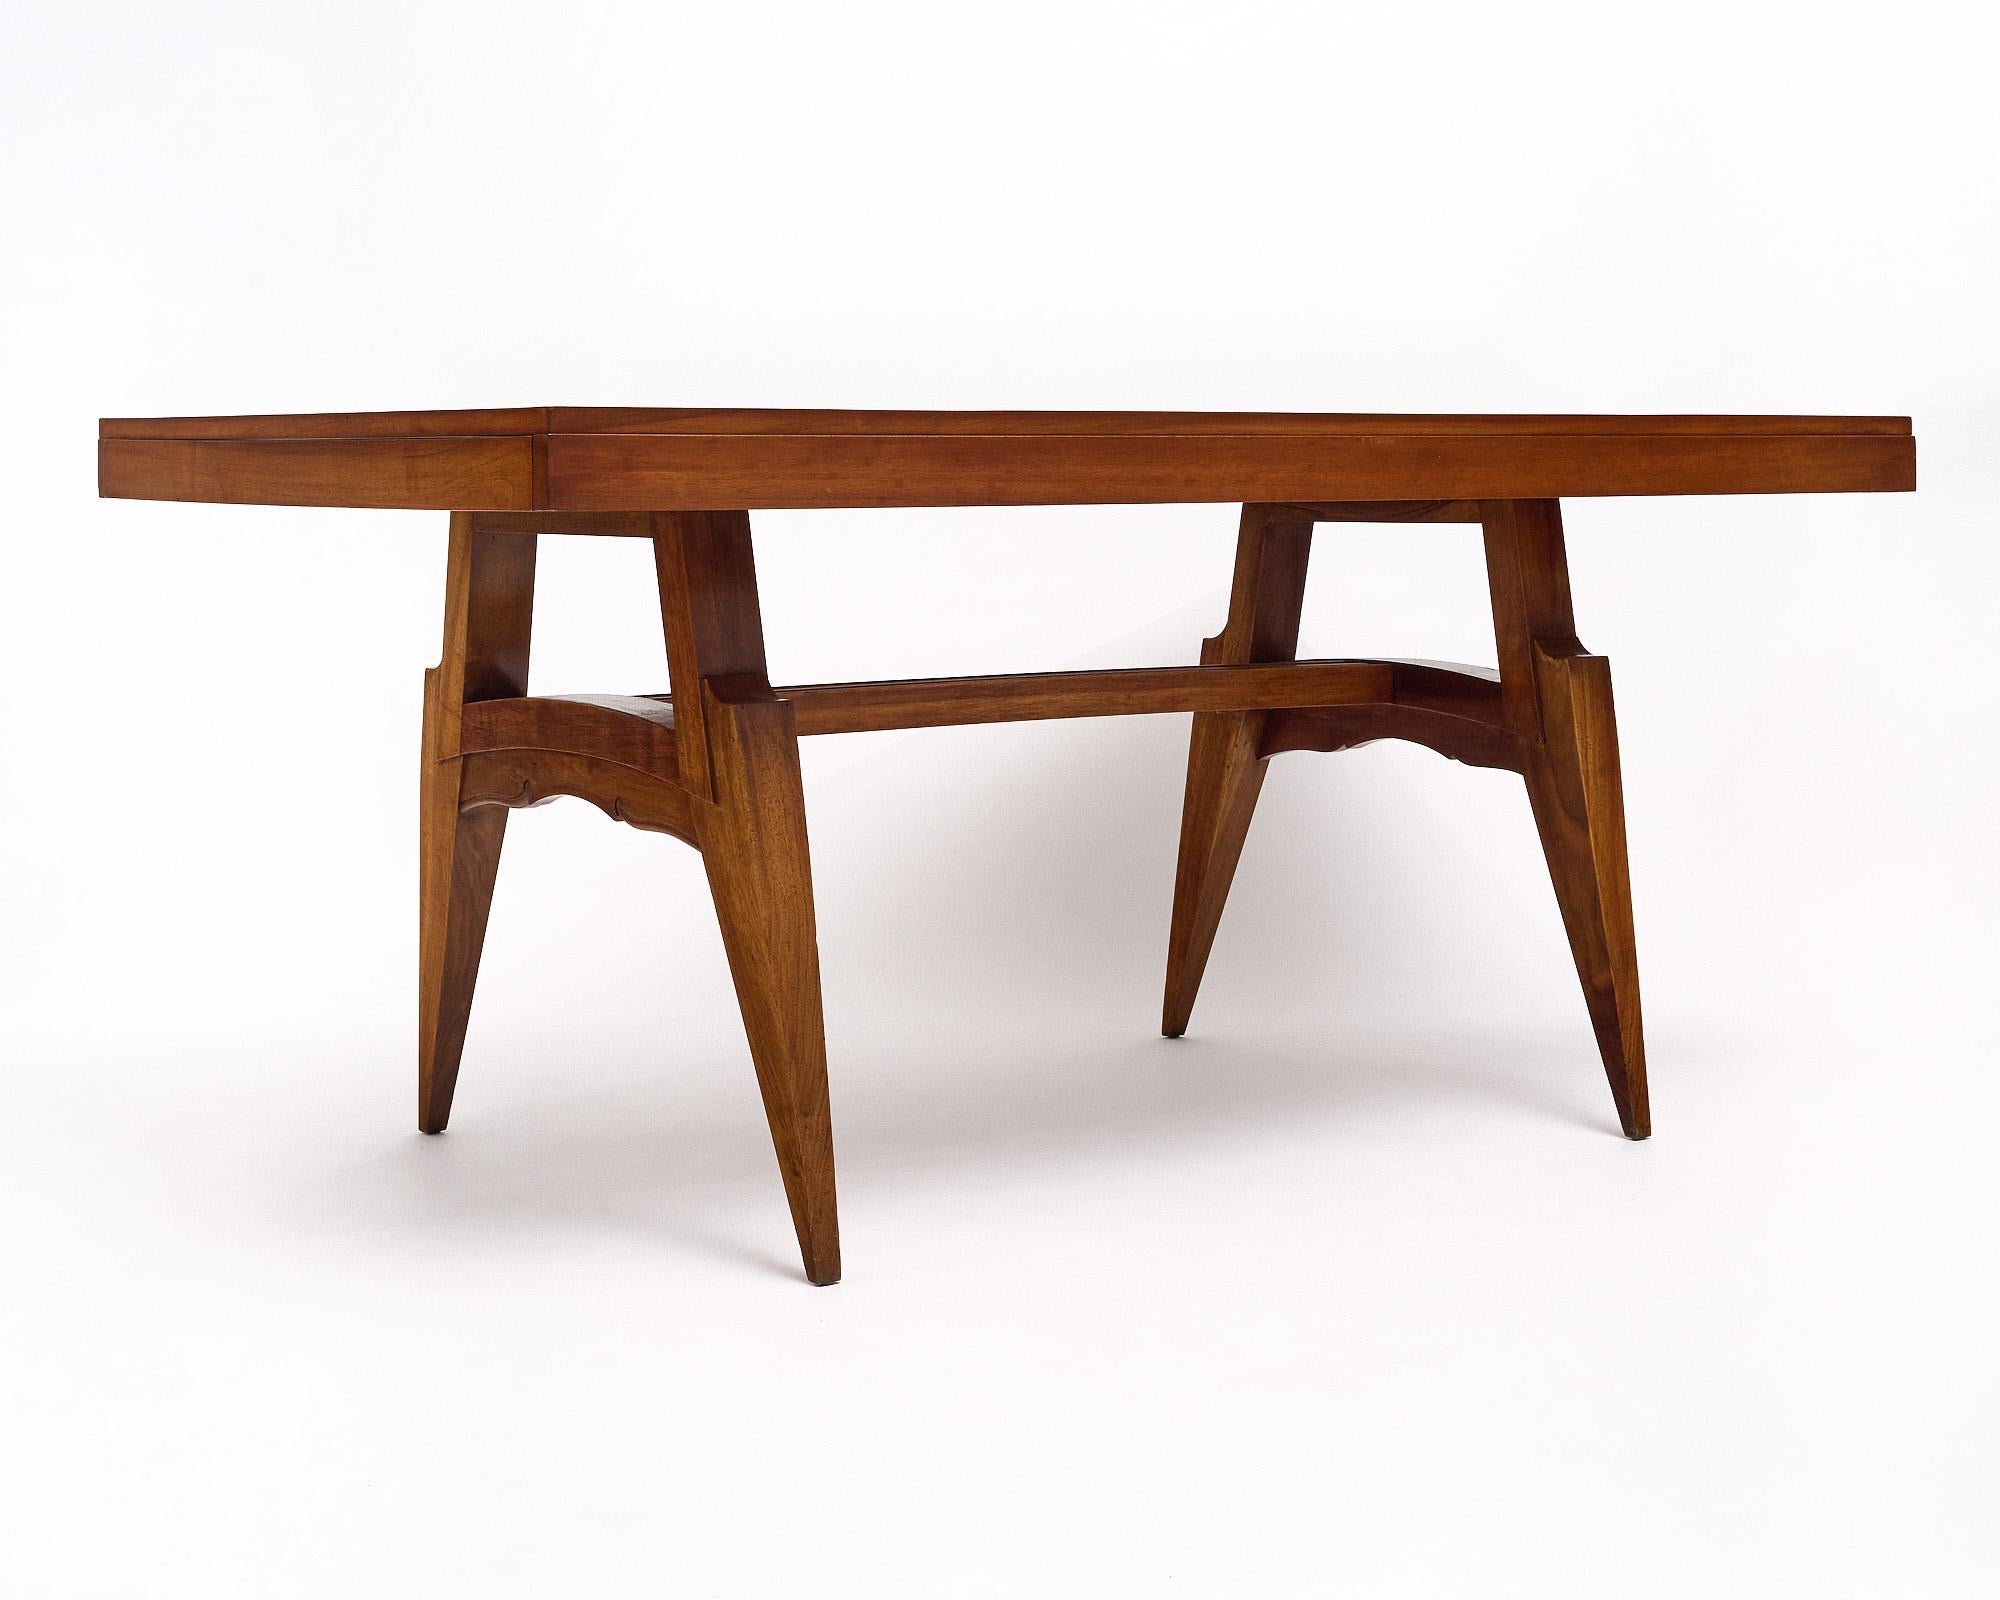 Dining table from the Art Deco period in France made with a beautiful rosewood parquetry top. The curved legs and detail to the stretchers give this table significance. It has been finished in a lustrous museum-quality French polish.